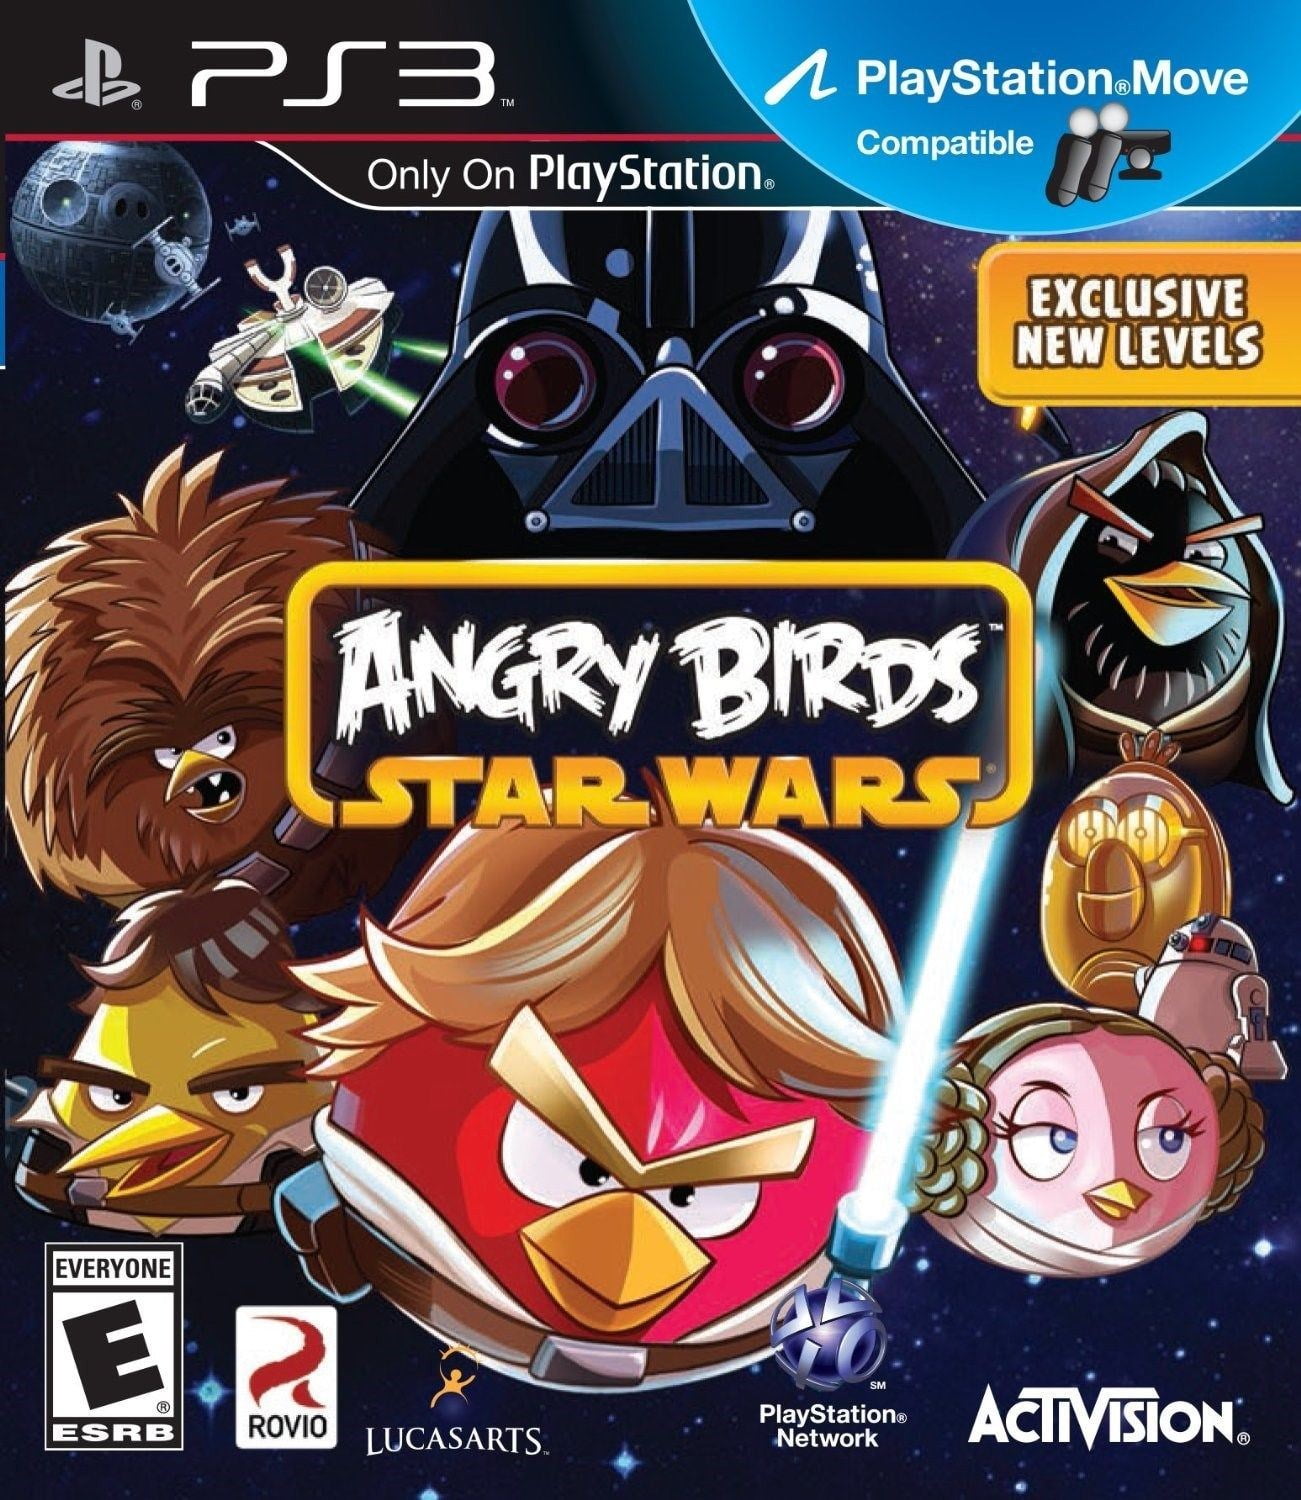 Playstation 3 - Angry Birds Star Wars